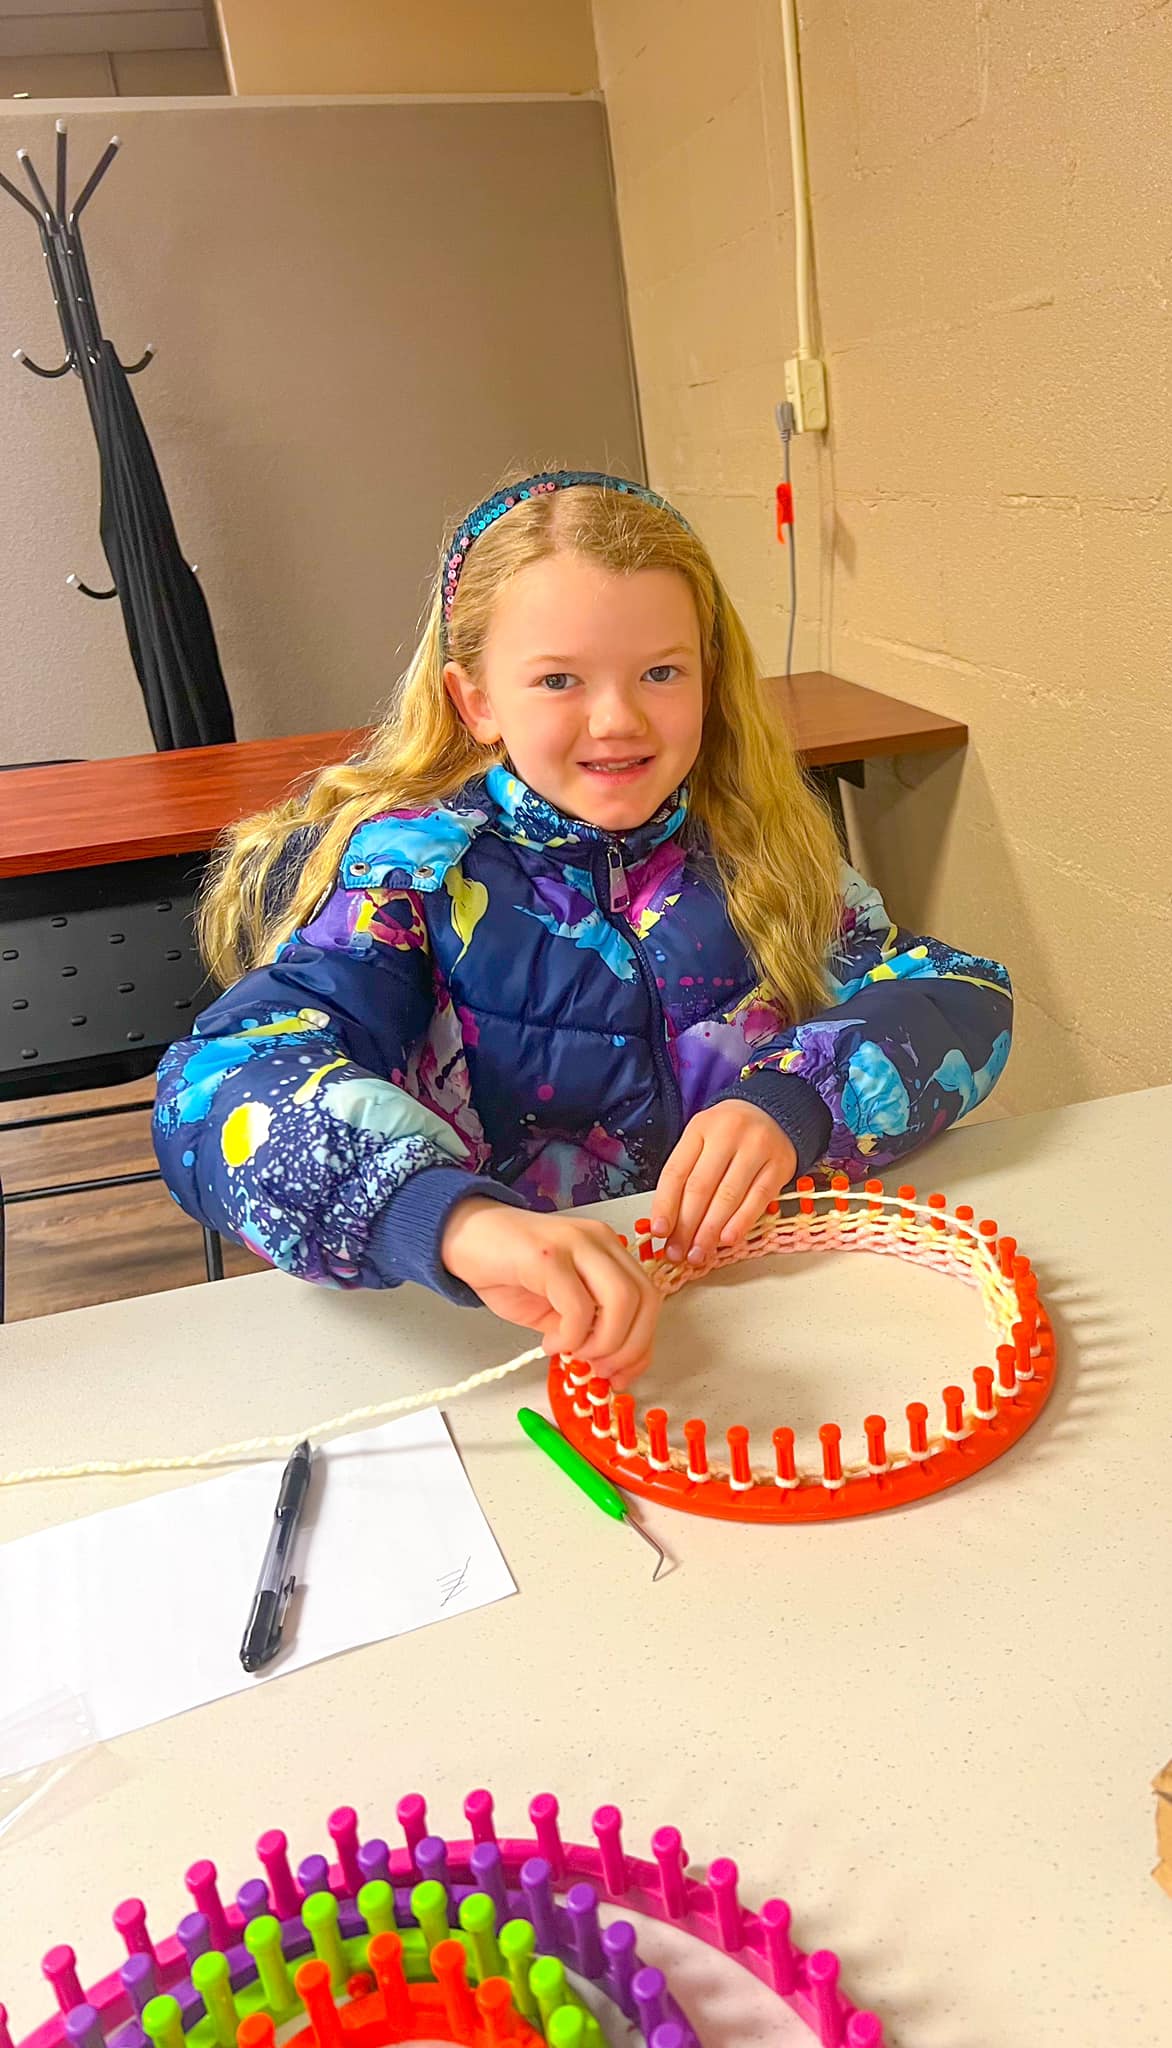 All Smiles for Learning the Skill of Loom Knitting